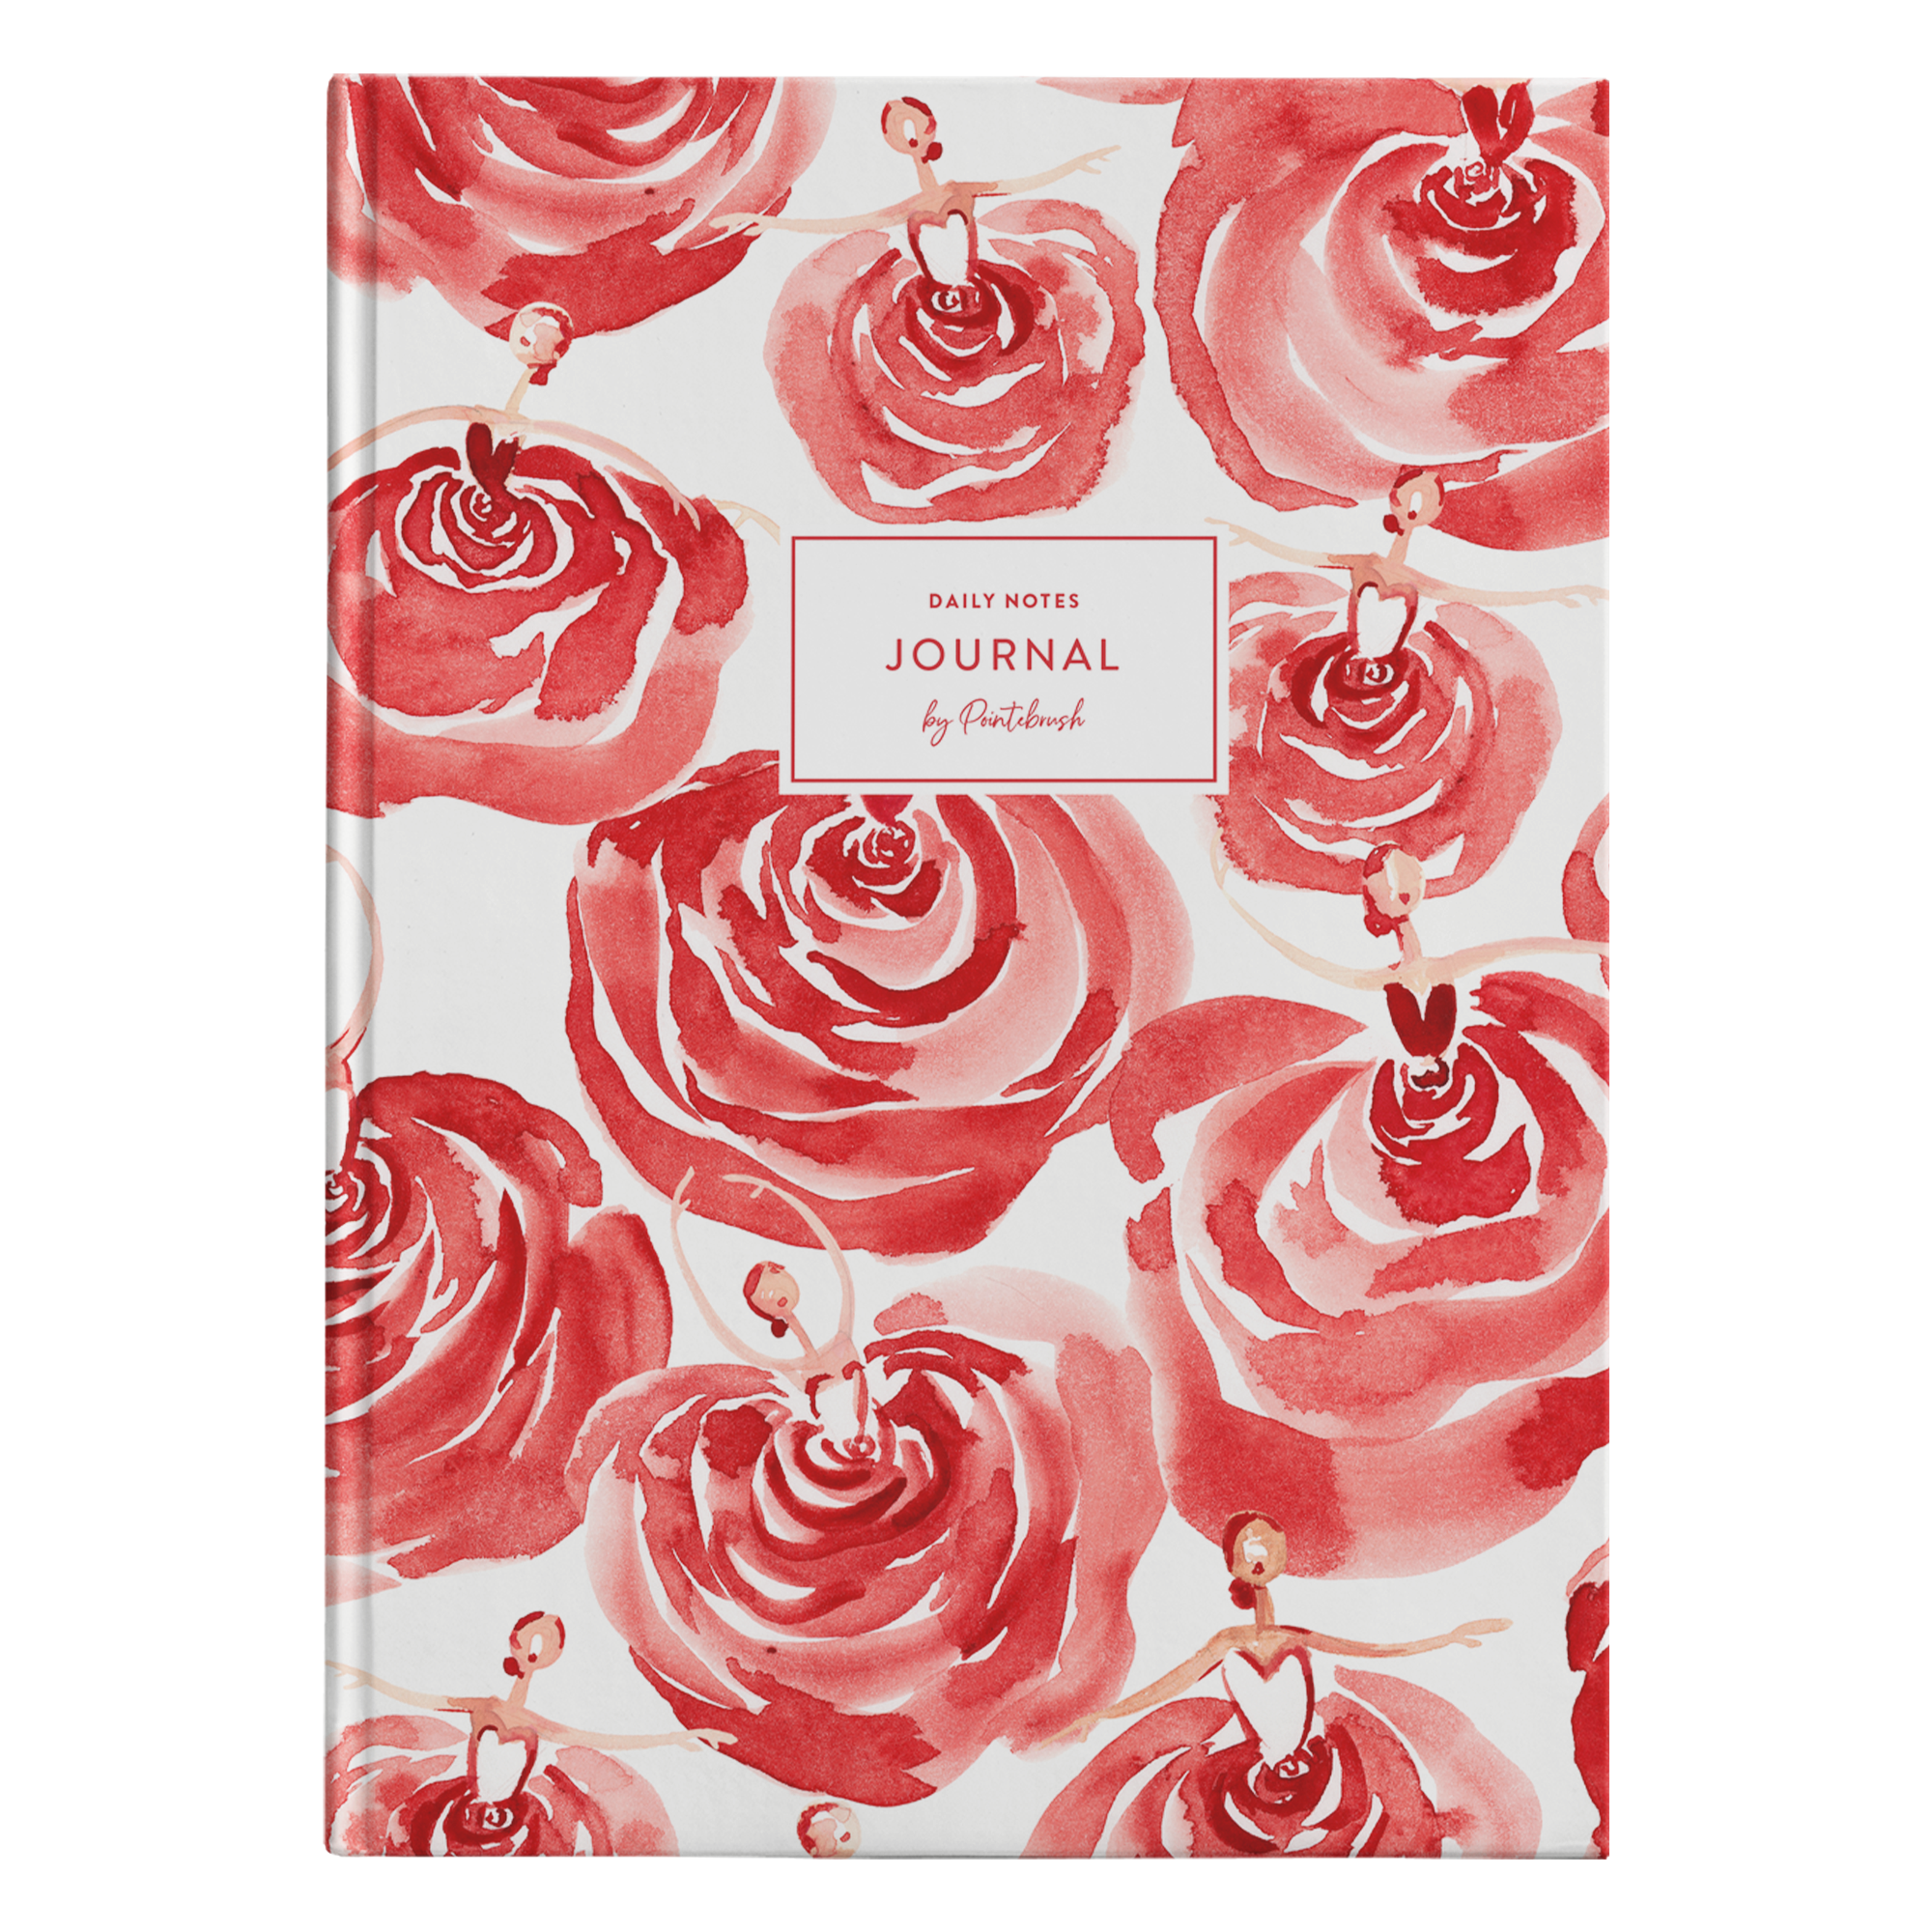 Waltz of the Roses Notebook